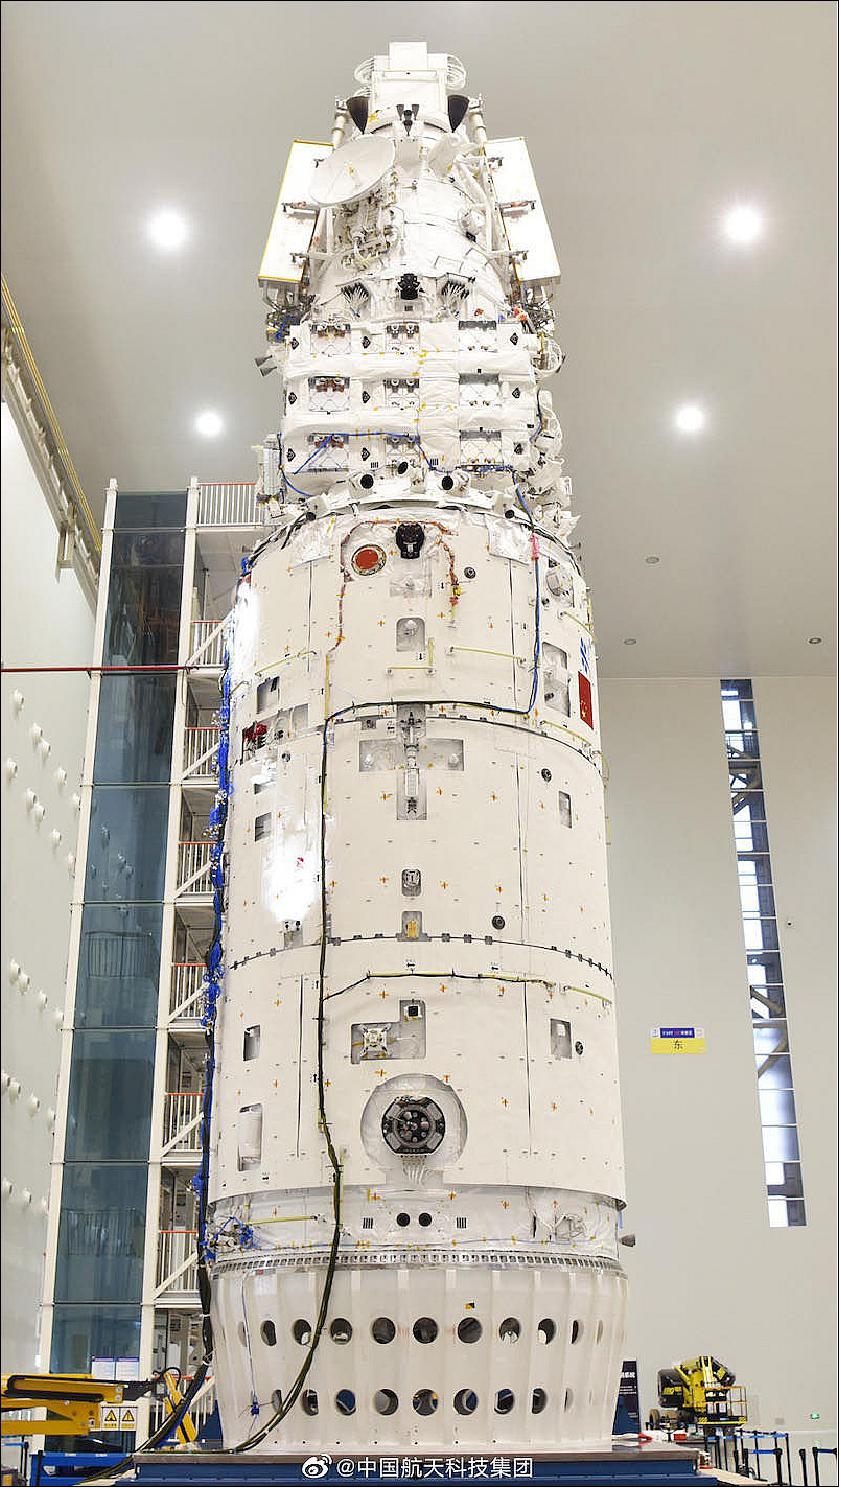 Figure 12: The Wentian module before launch to China’s space station (image credit: CASC)